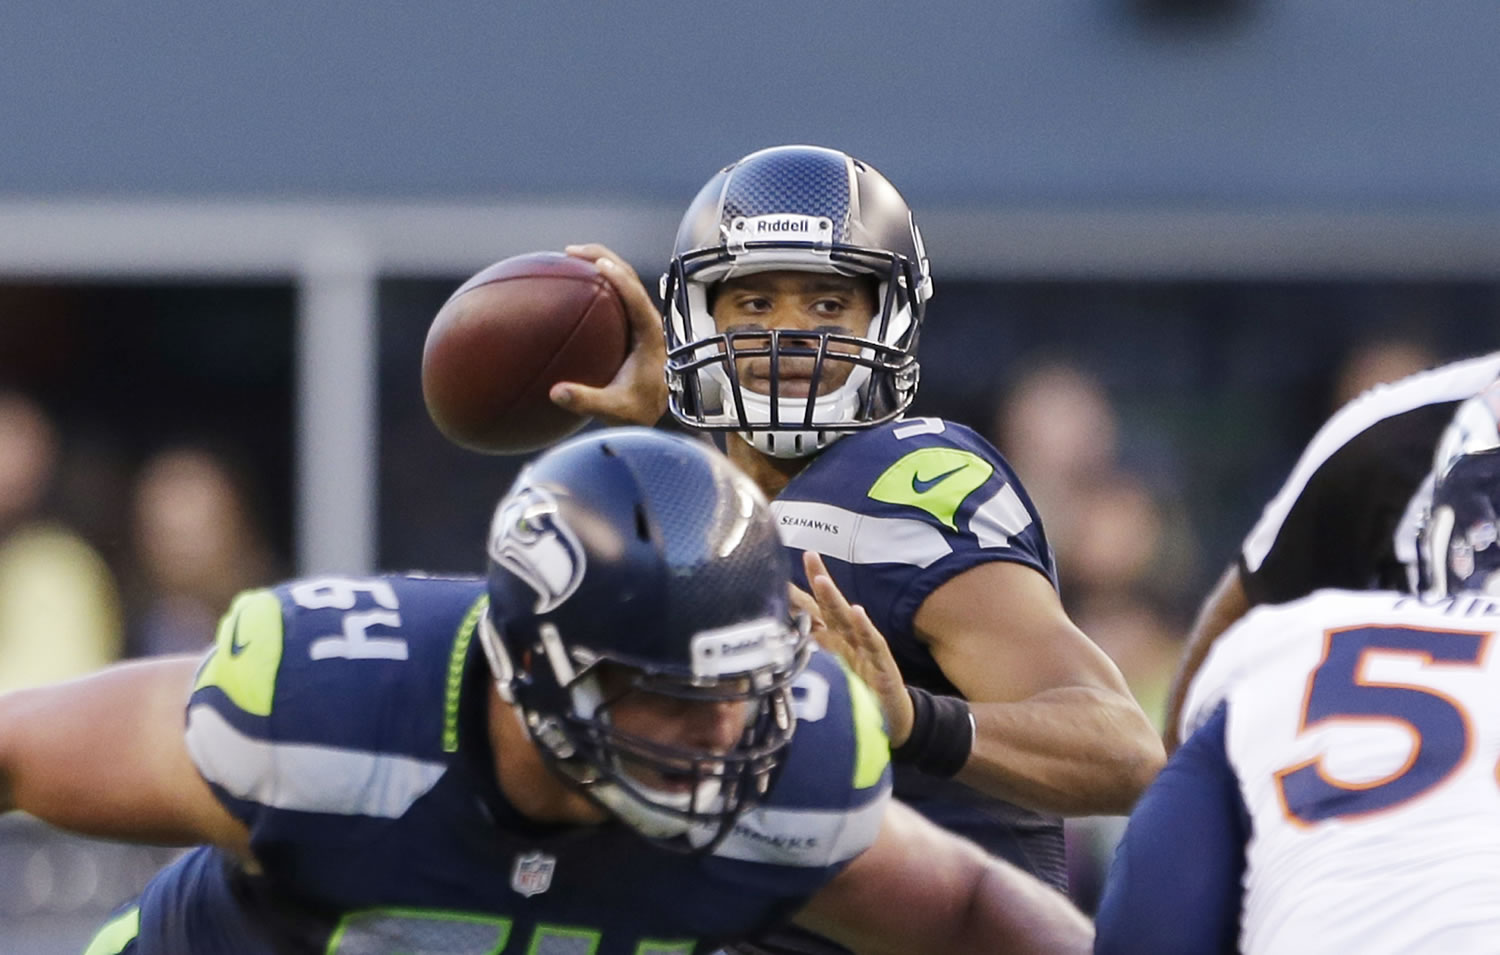 Seattle Seahawks quarterback Russell Wilson threw two touchdown passes against the Denver Broncos on Saturday in his first extensive preseason action.